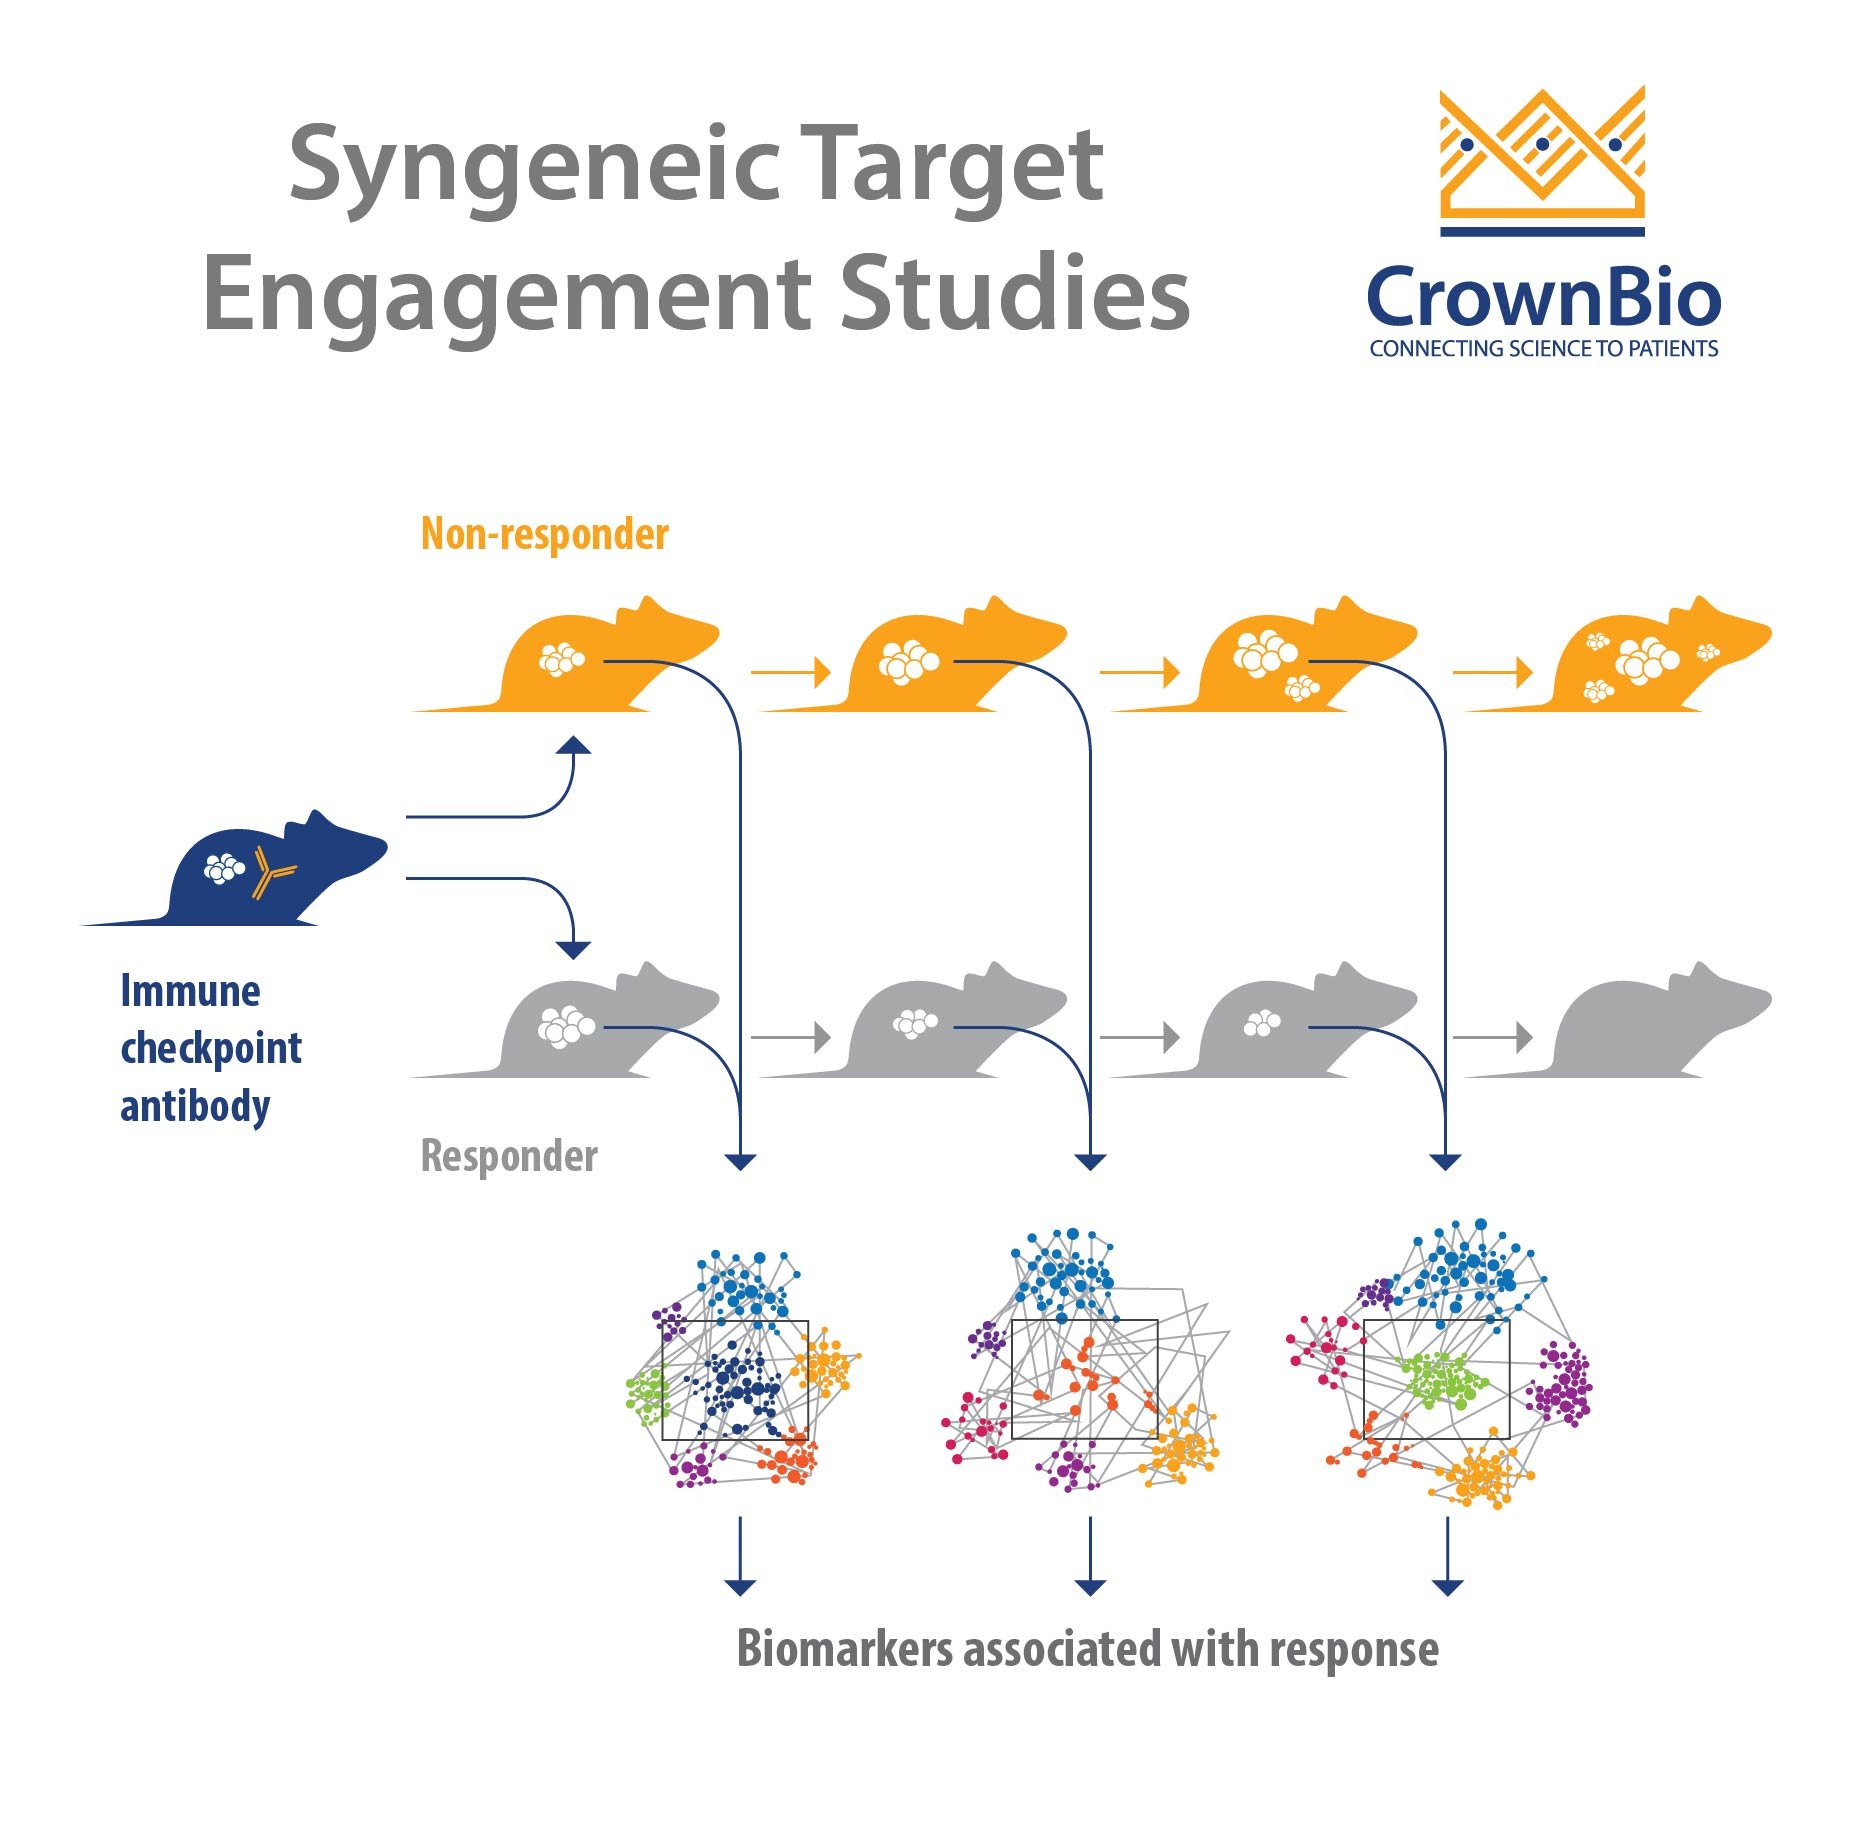 Infographic showing the concept of using syngeneic tumor models for immunotherapy target engagement studies